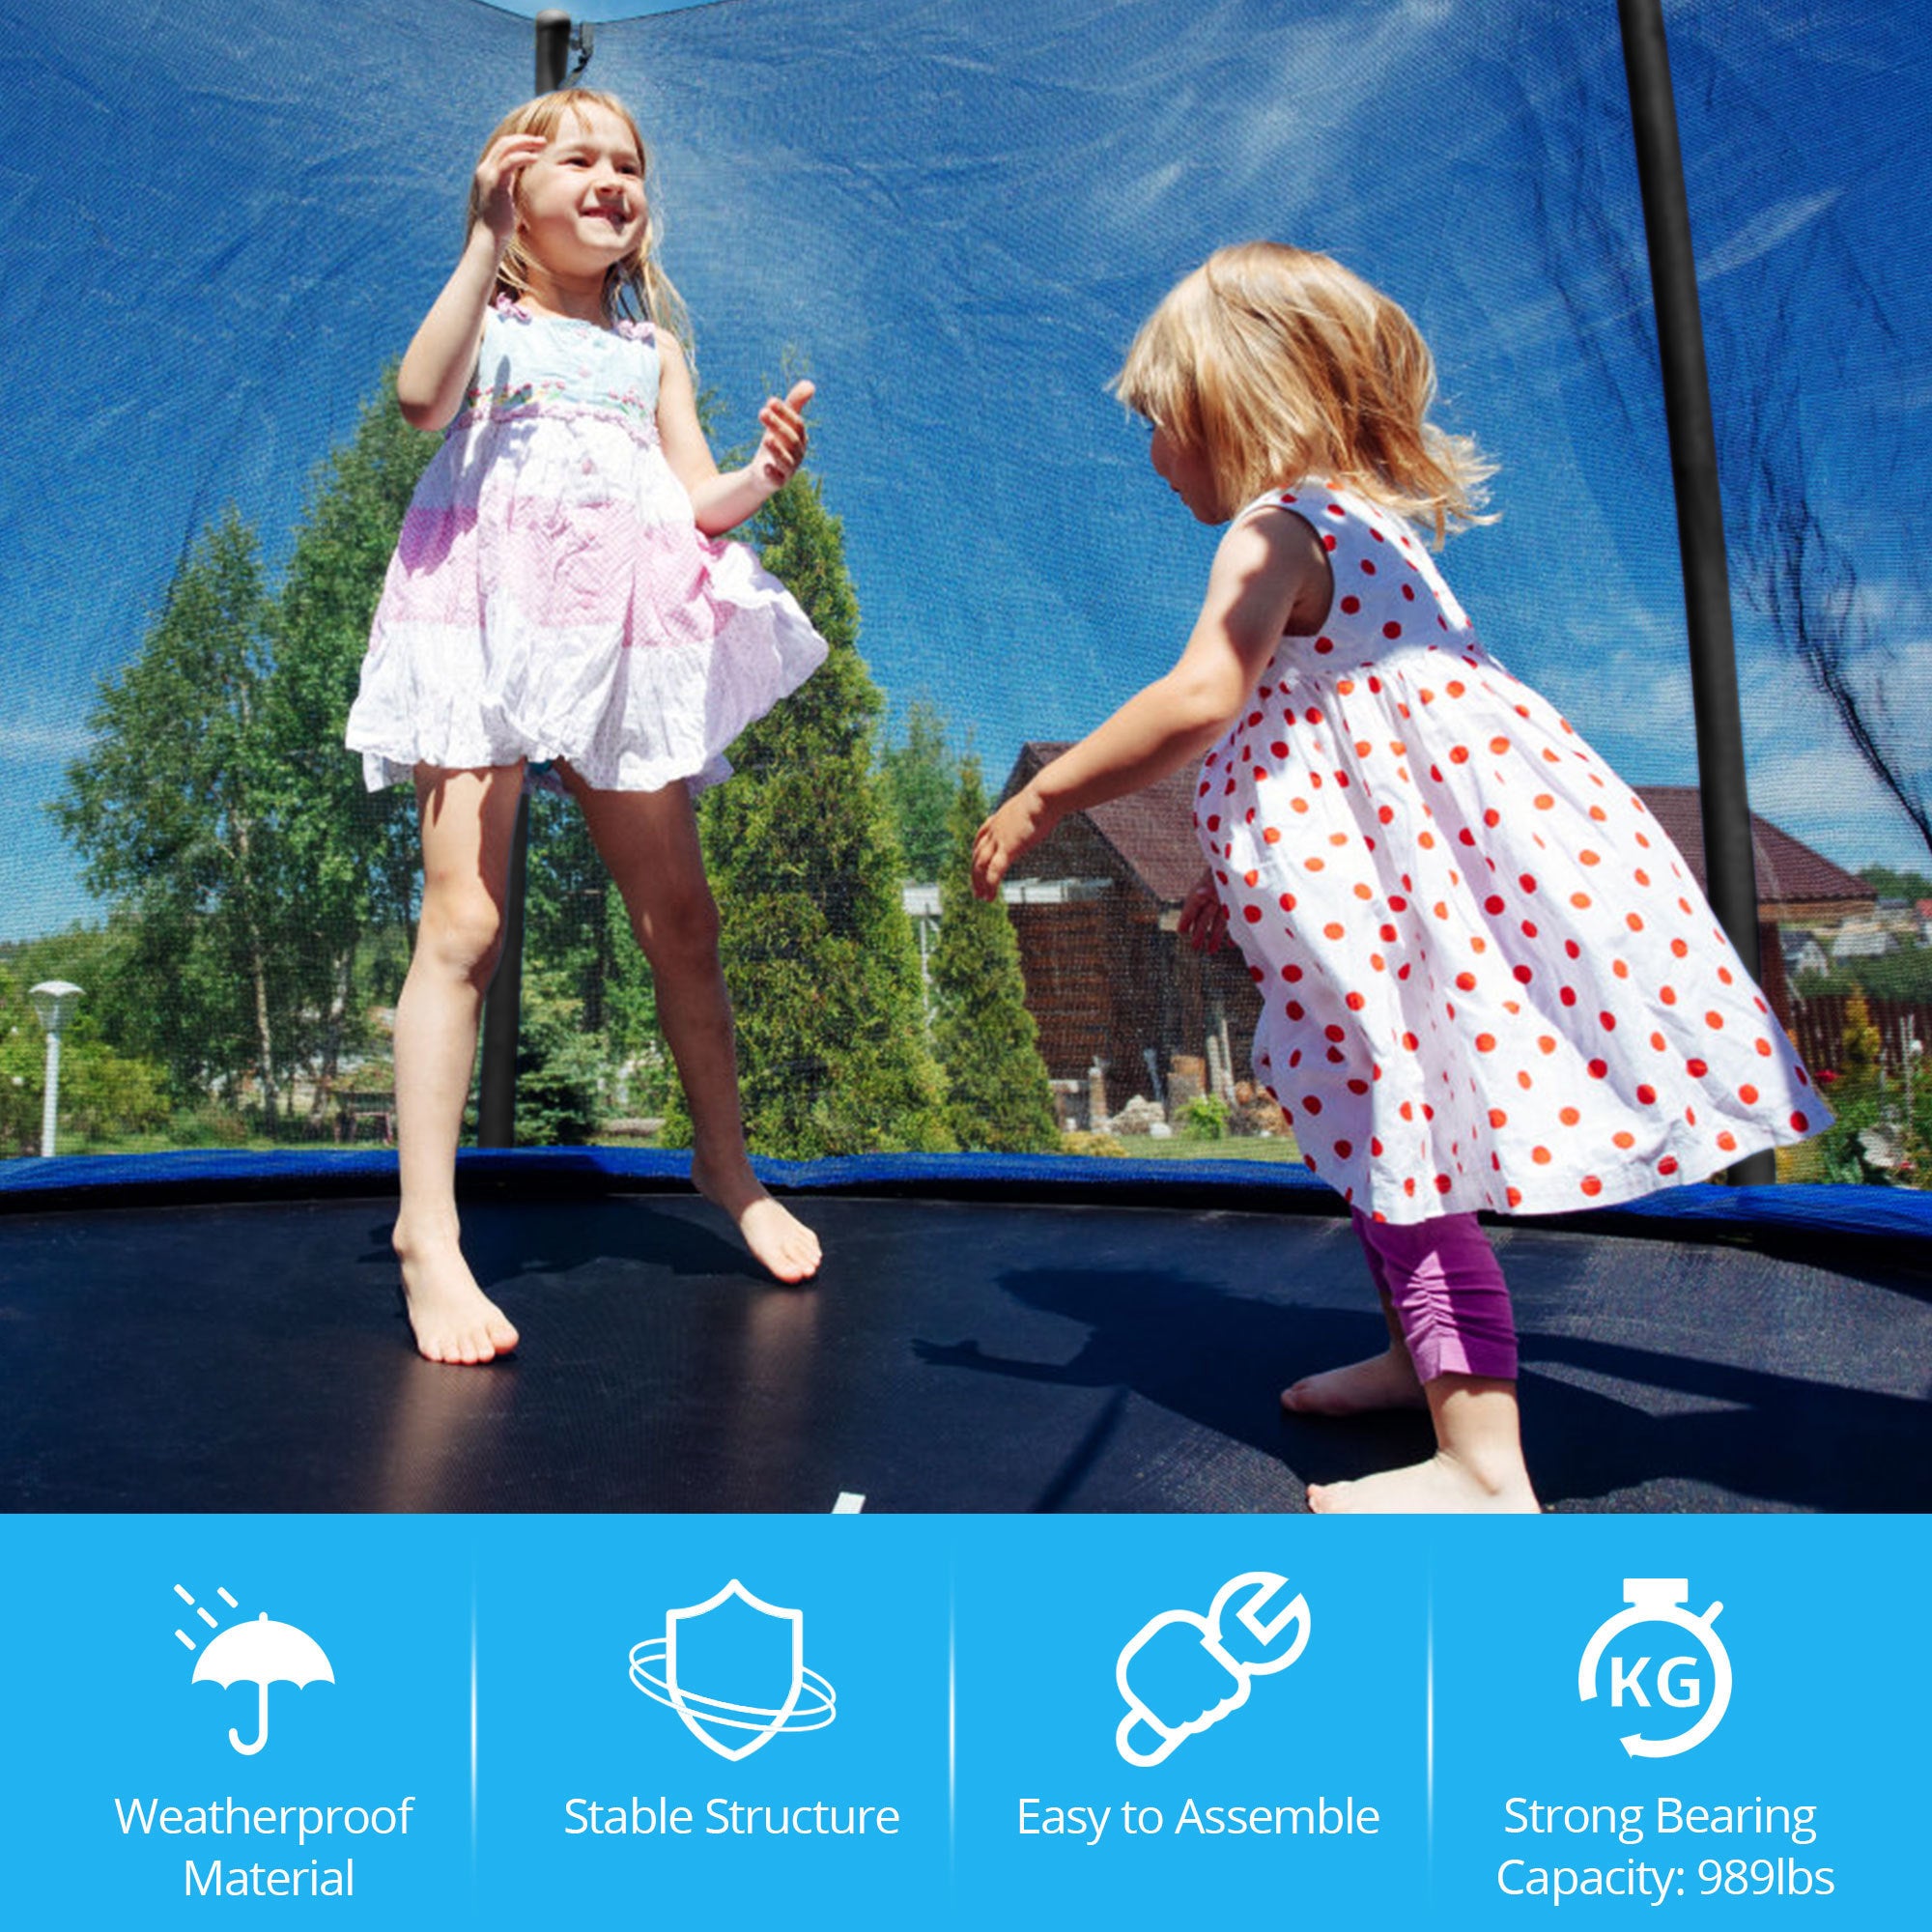 Outdoor Trampoline with L-zipper 10FT, Blue